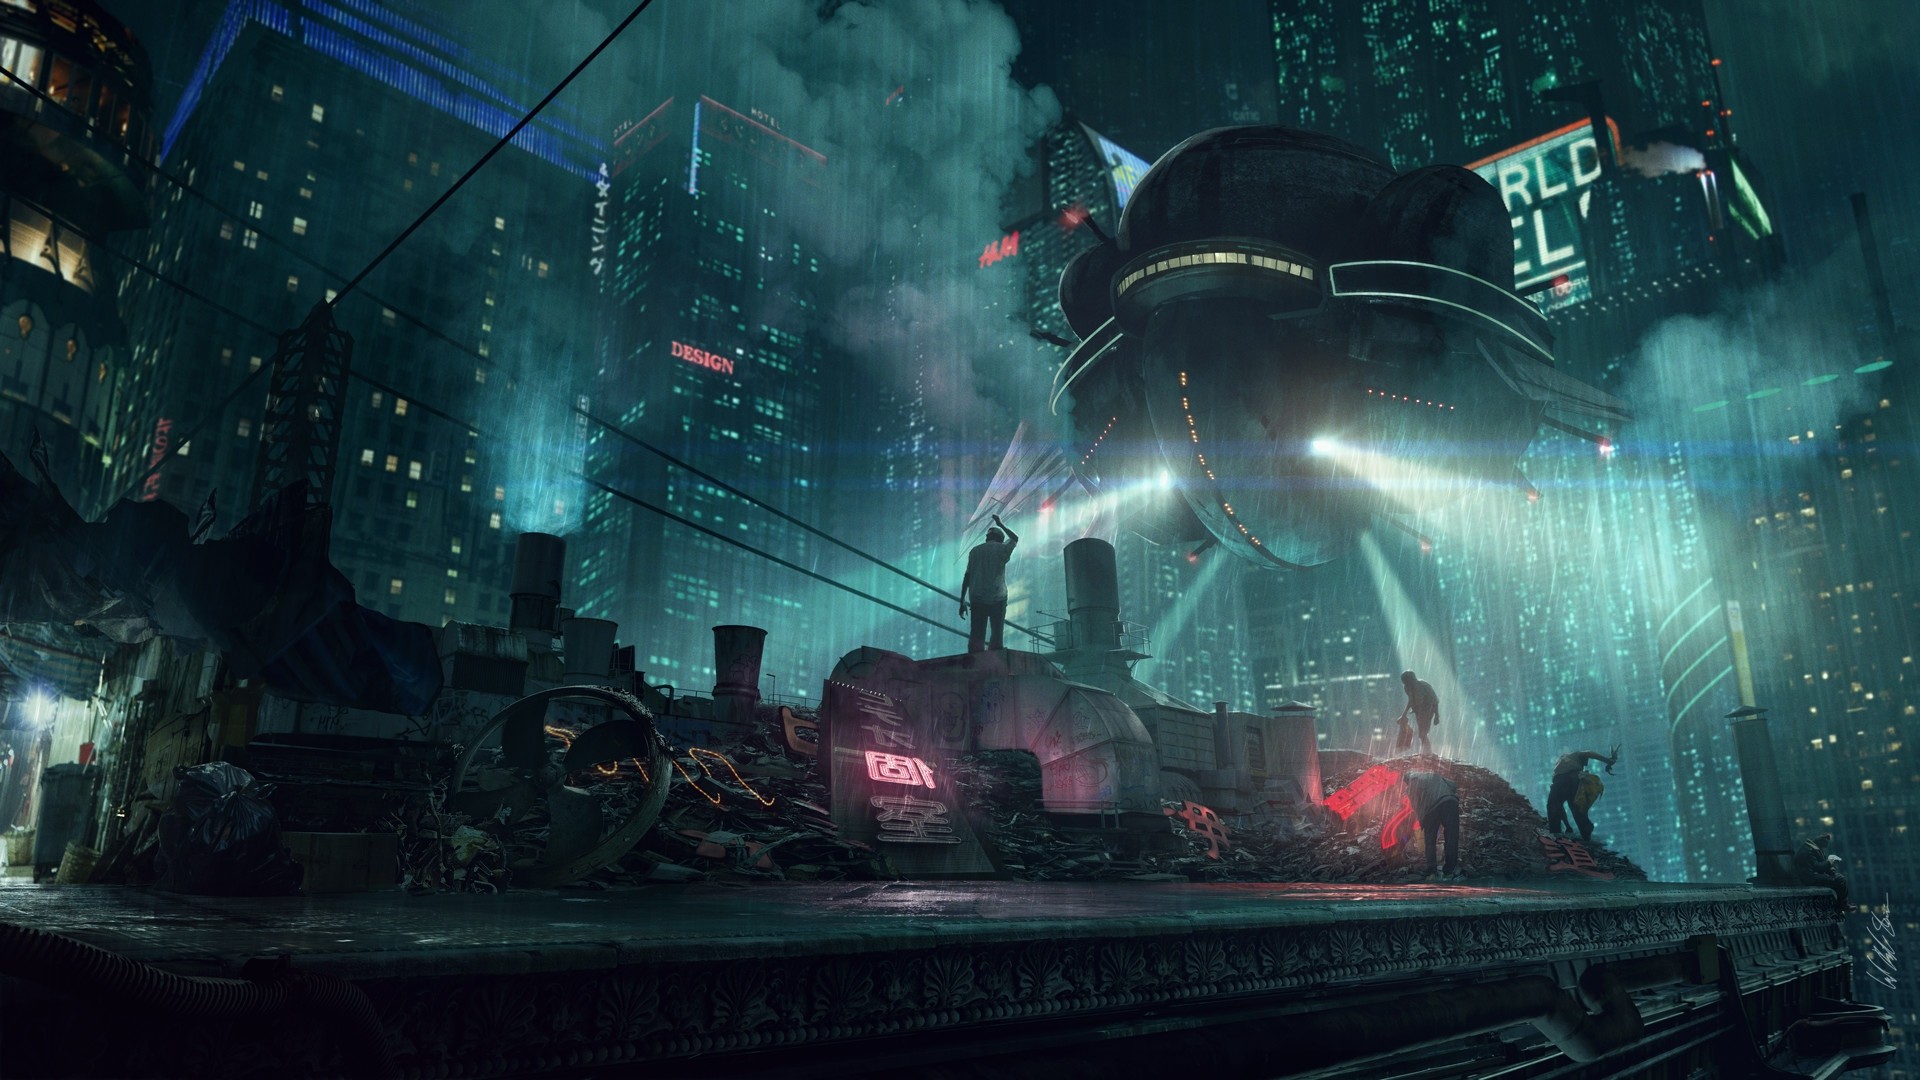 1920x1080 Raining in a cyberpunk city [x-post from /r/wallpapers] ...